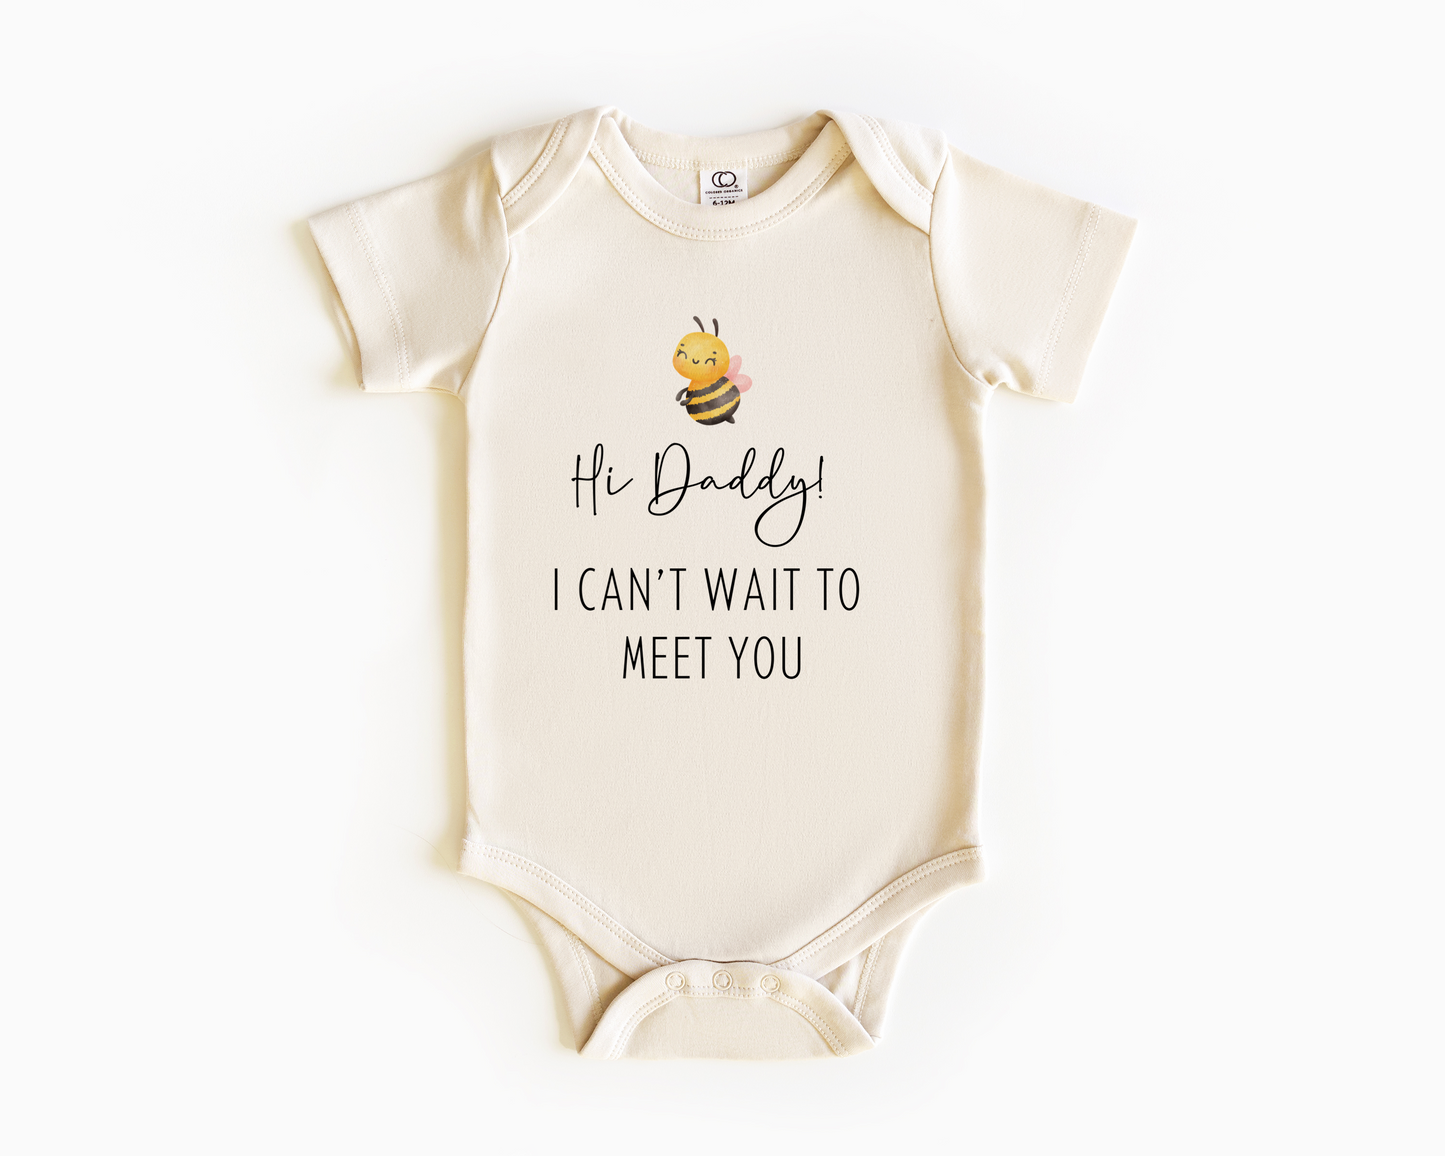 Hi Daddy Surprise Baby Onepiece for Pregnancy Announcement